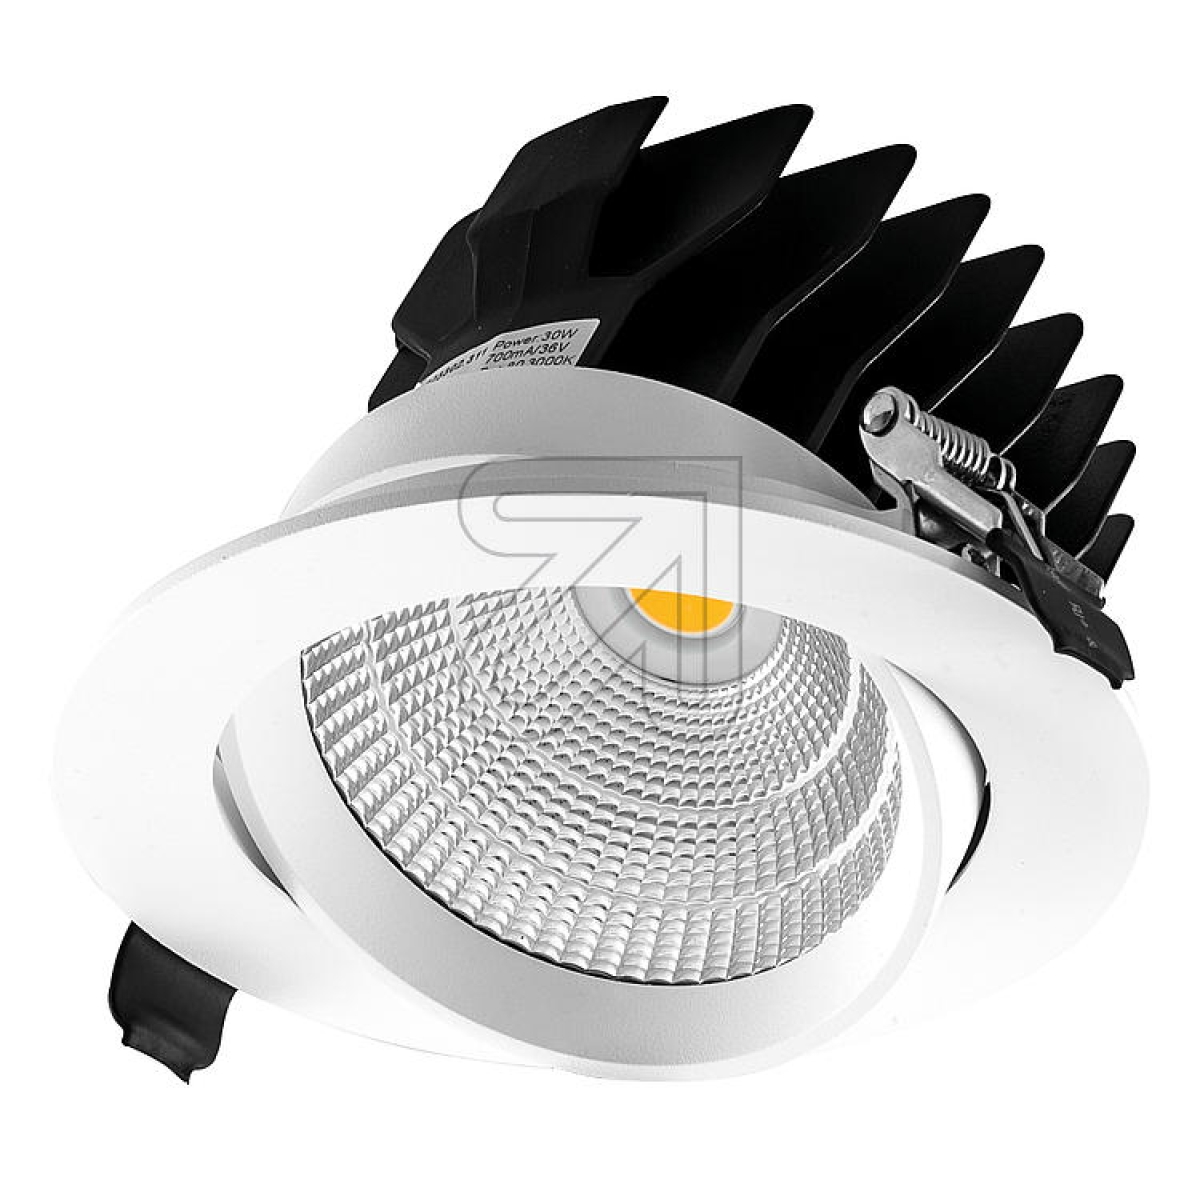 EVNLED recessed spotlight round white 3000K 27W PC20300102 swivelingArticle-No: 670105